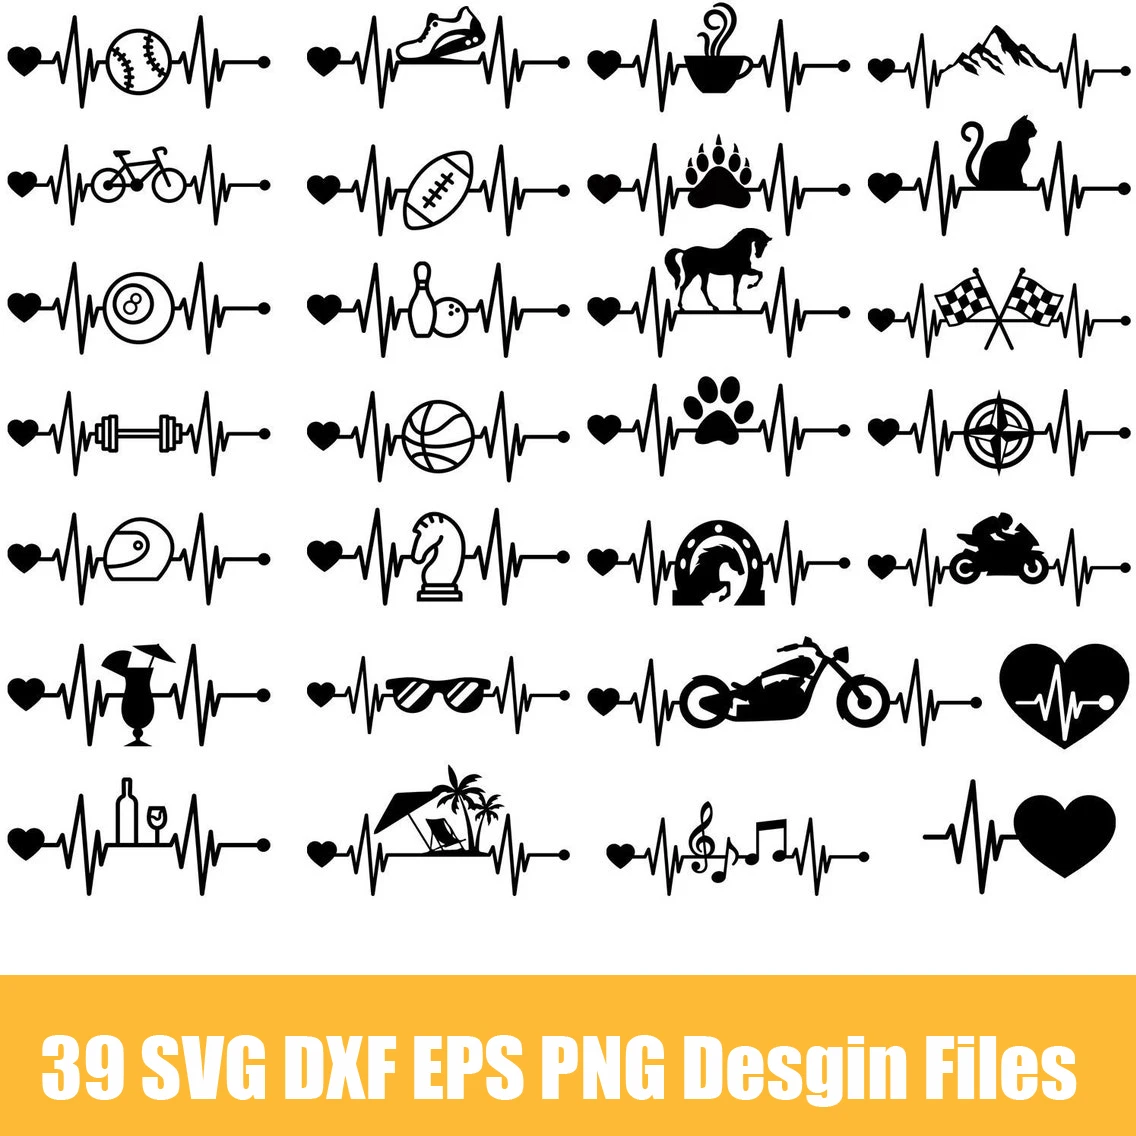 wood pellet making machine Heartbeat SVG DXF EPS PNG Vector Digital File T-shirt Design Download for Silhouette,Laser Cut , Printing harbor freight woodworking bench